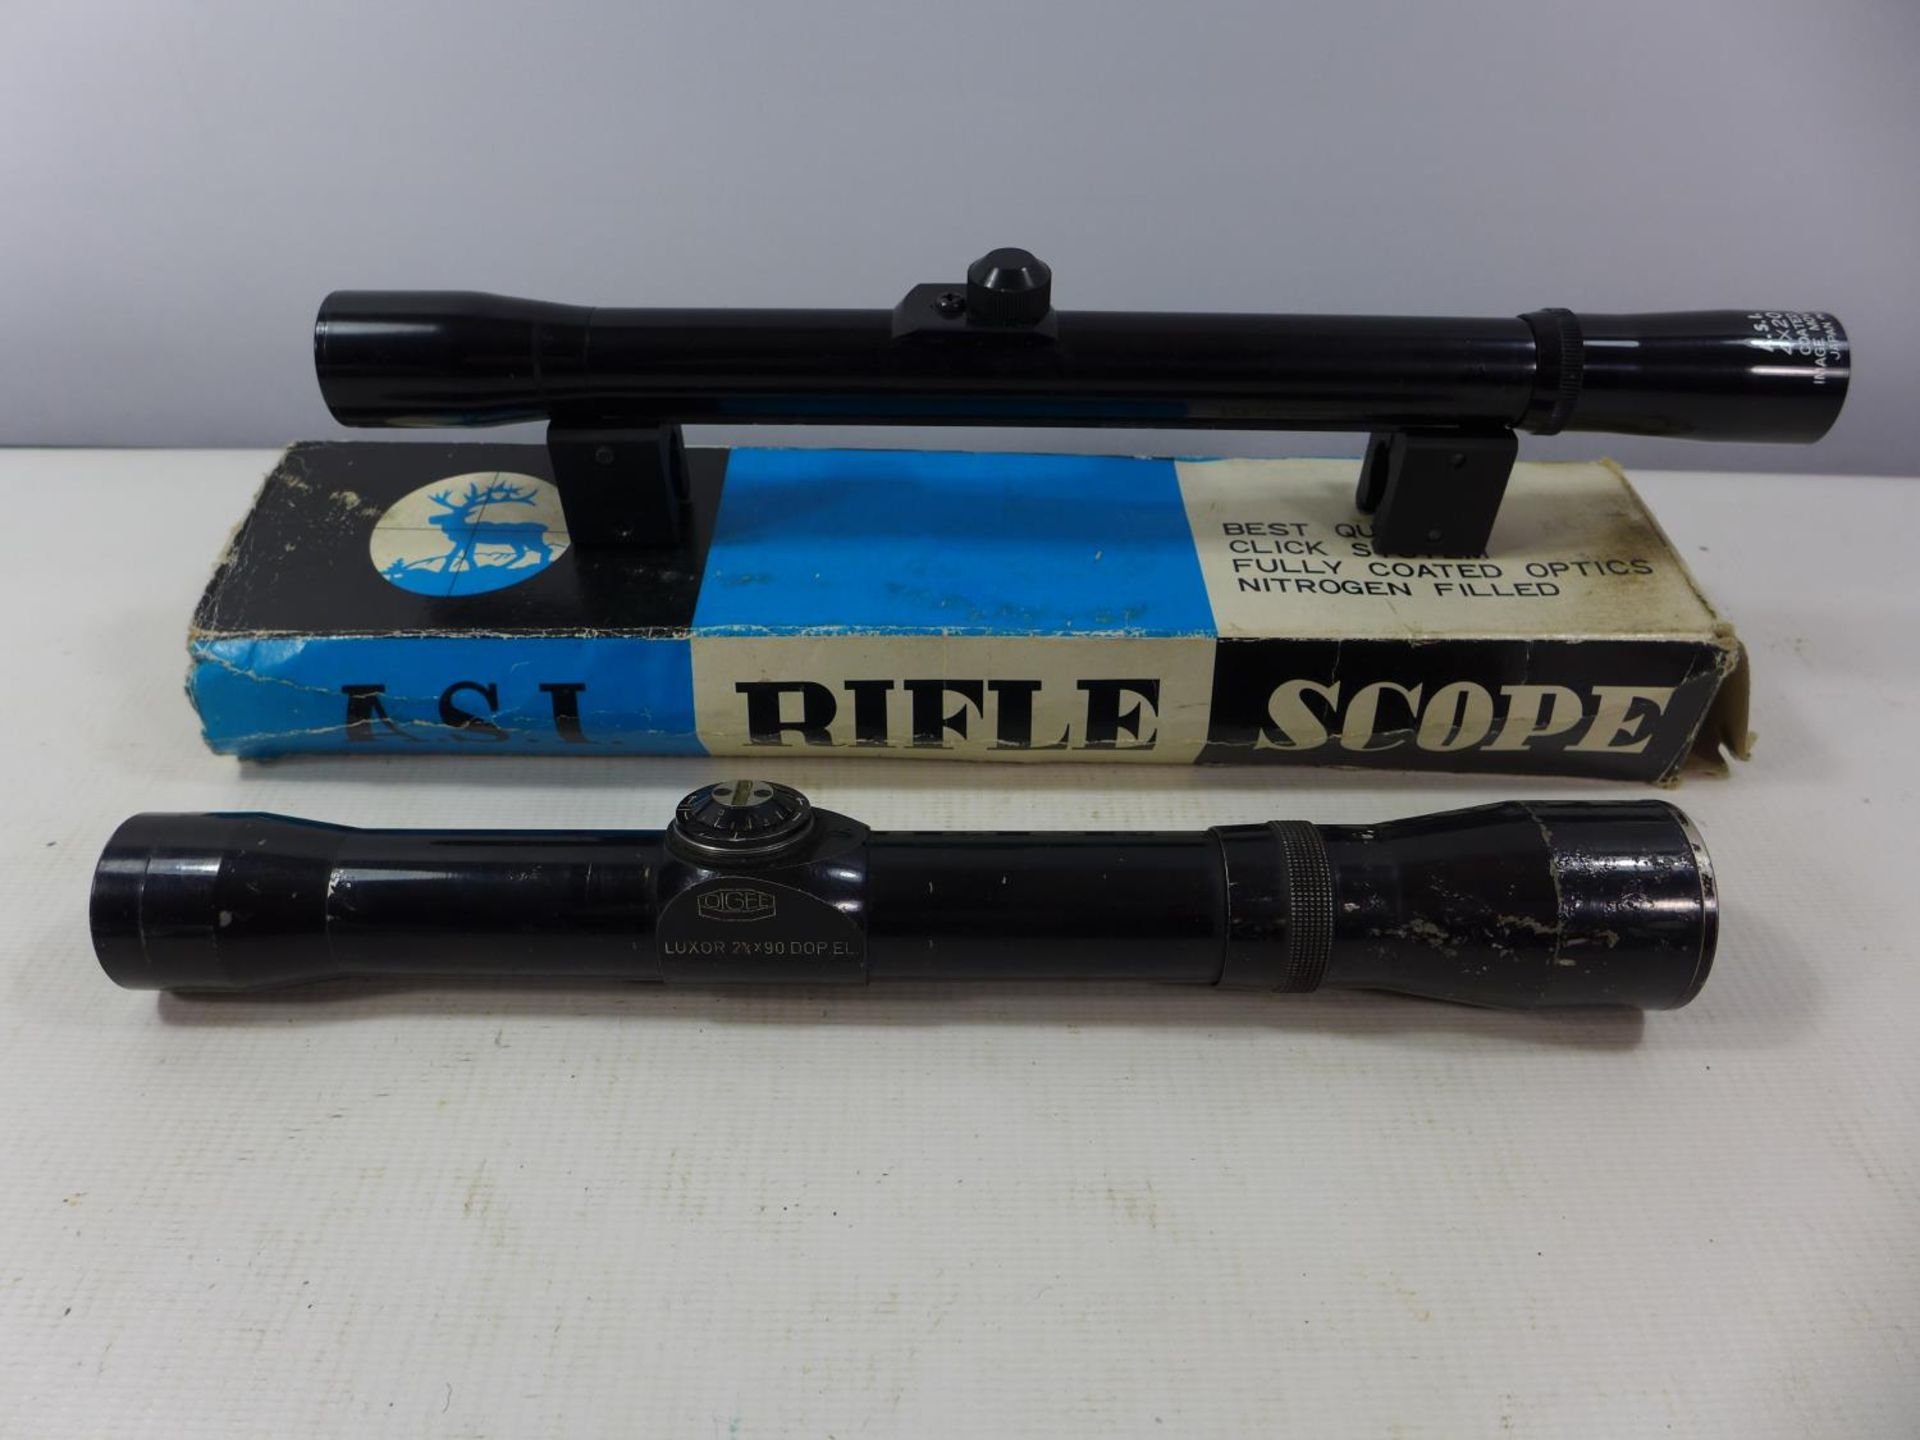 A BOXED A.S.I. 4 X 20 TELESCOPIC SIGHT AND A OIGEE LUXOR 2 3/4 X 90 SIGHT (2)